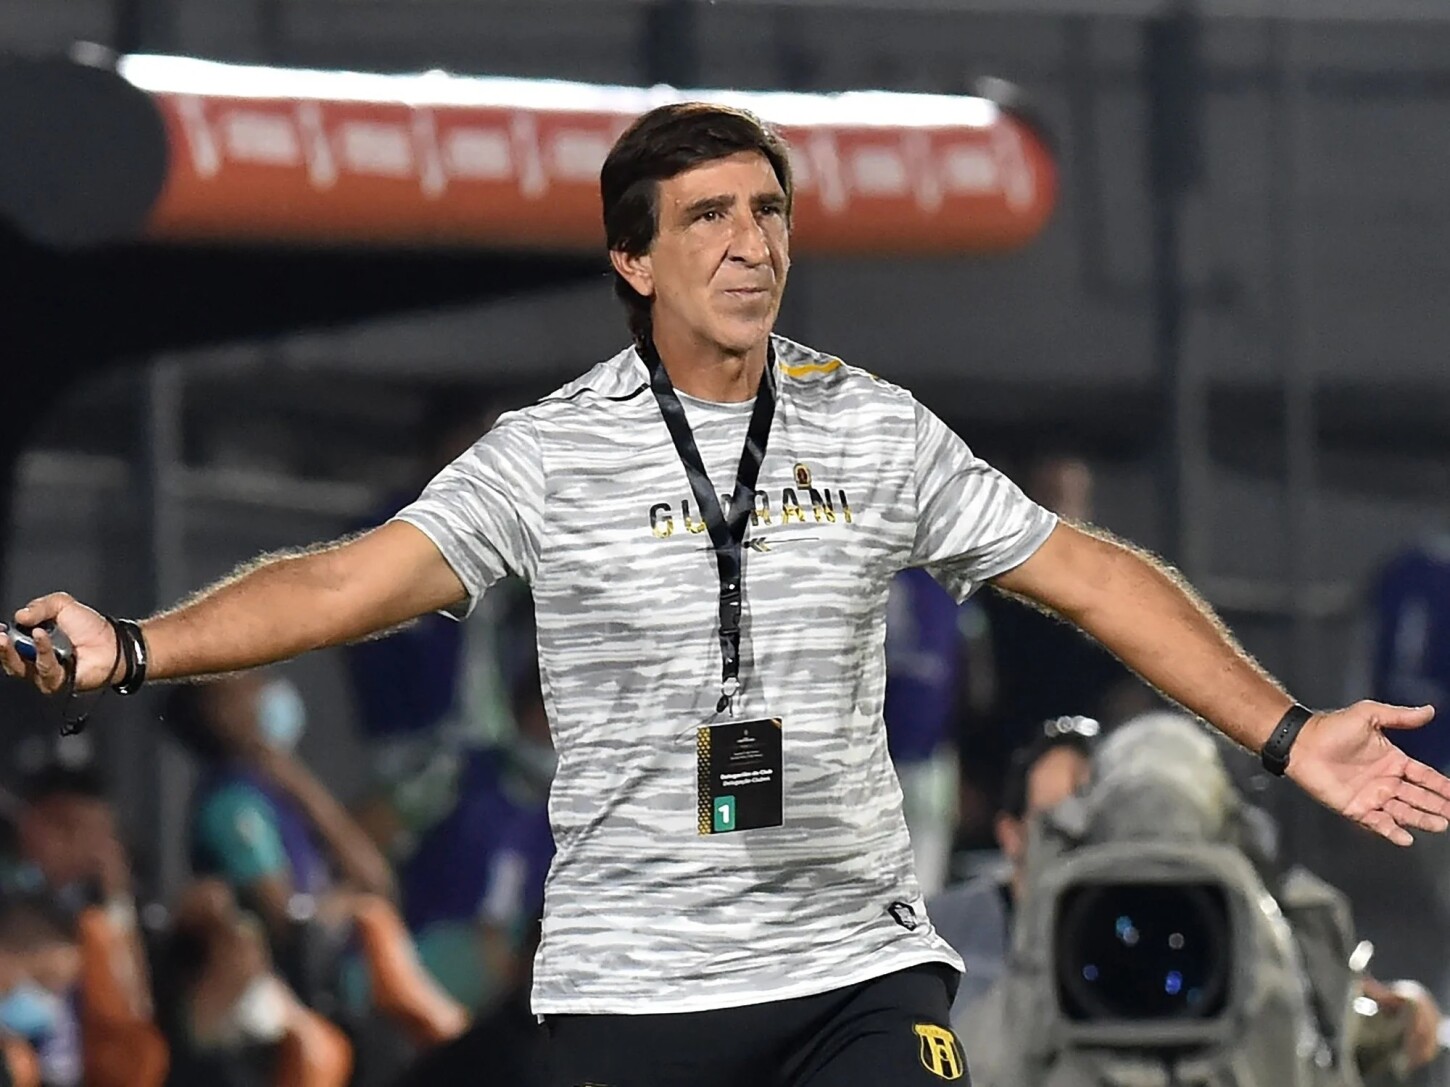 Argentine Gustavo Costas will take command of the Bolivian national team